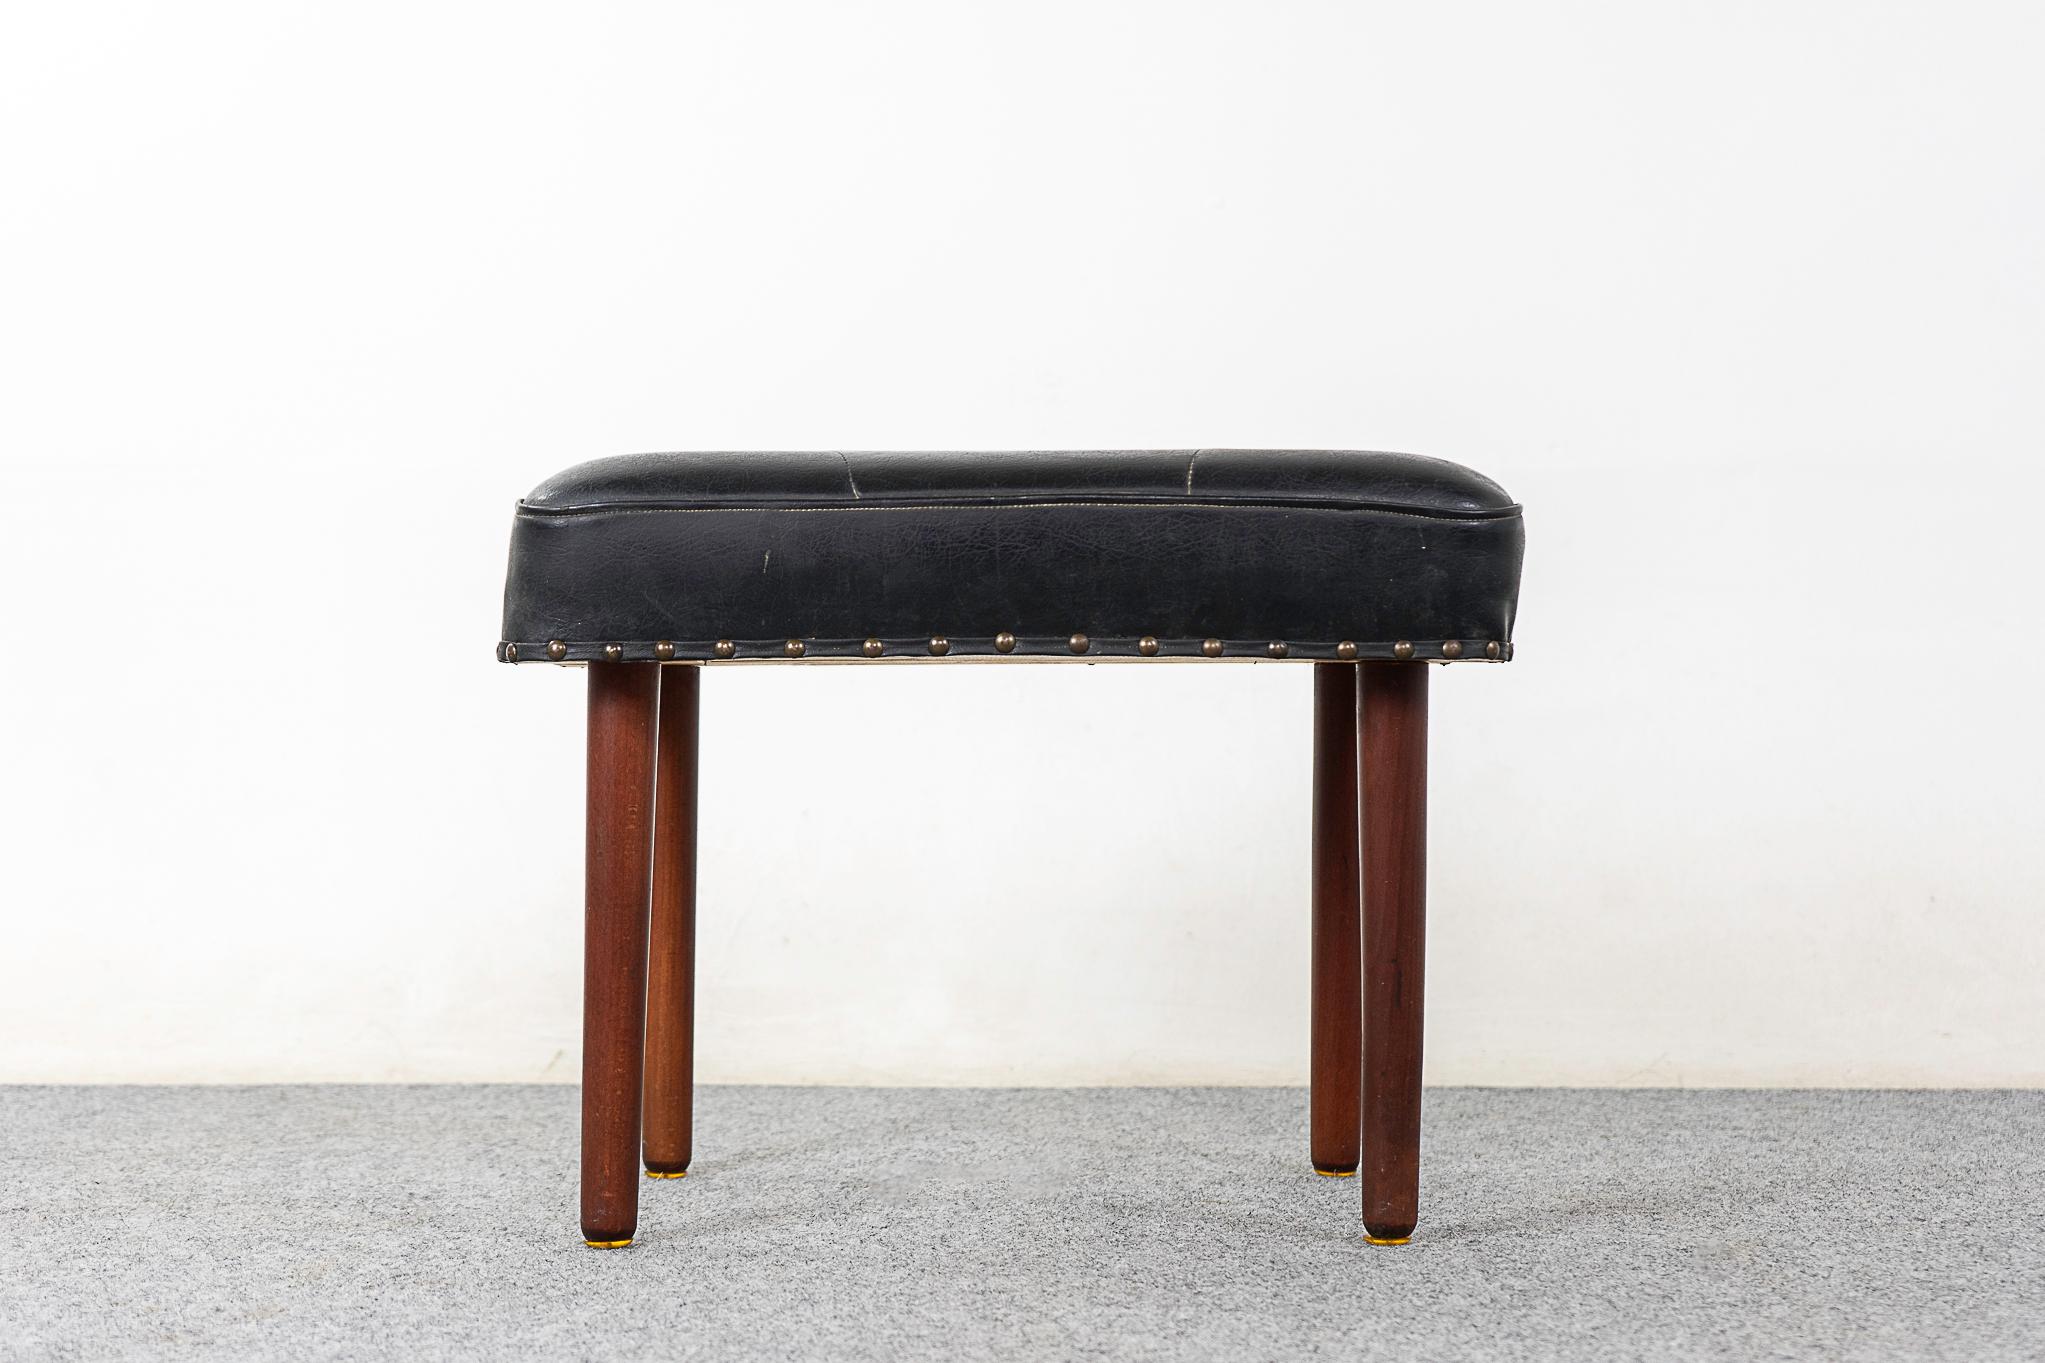 Teak Danish footstool, circa 1960's. Removeable legs and original upholstery with minor wear and tear. 